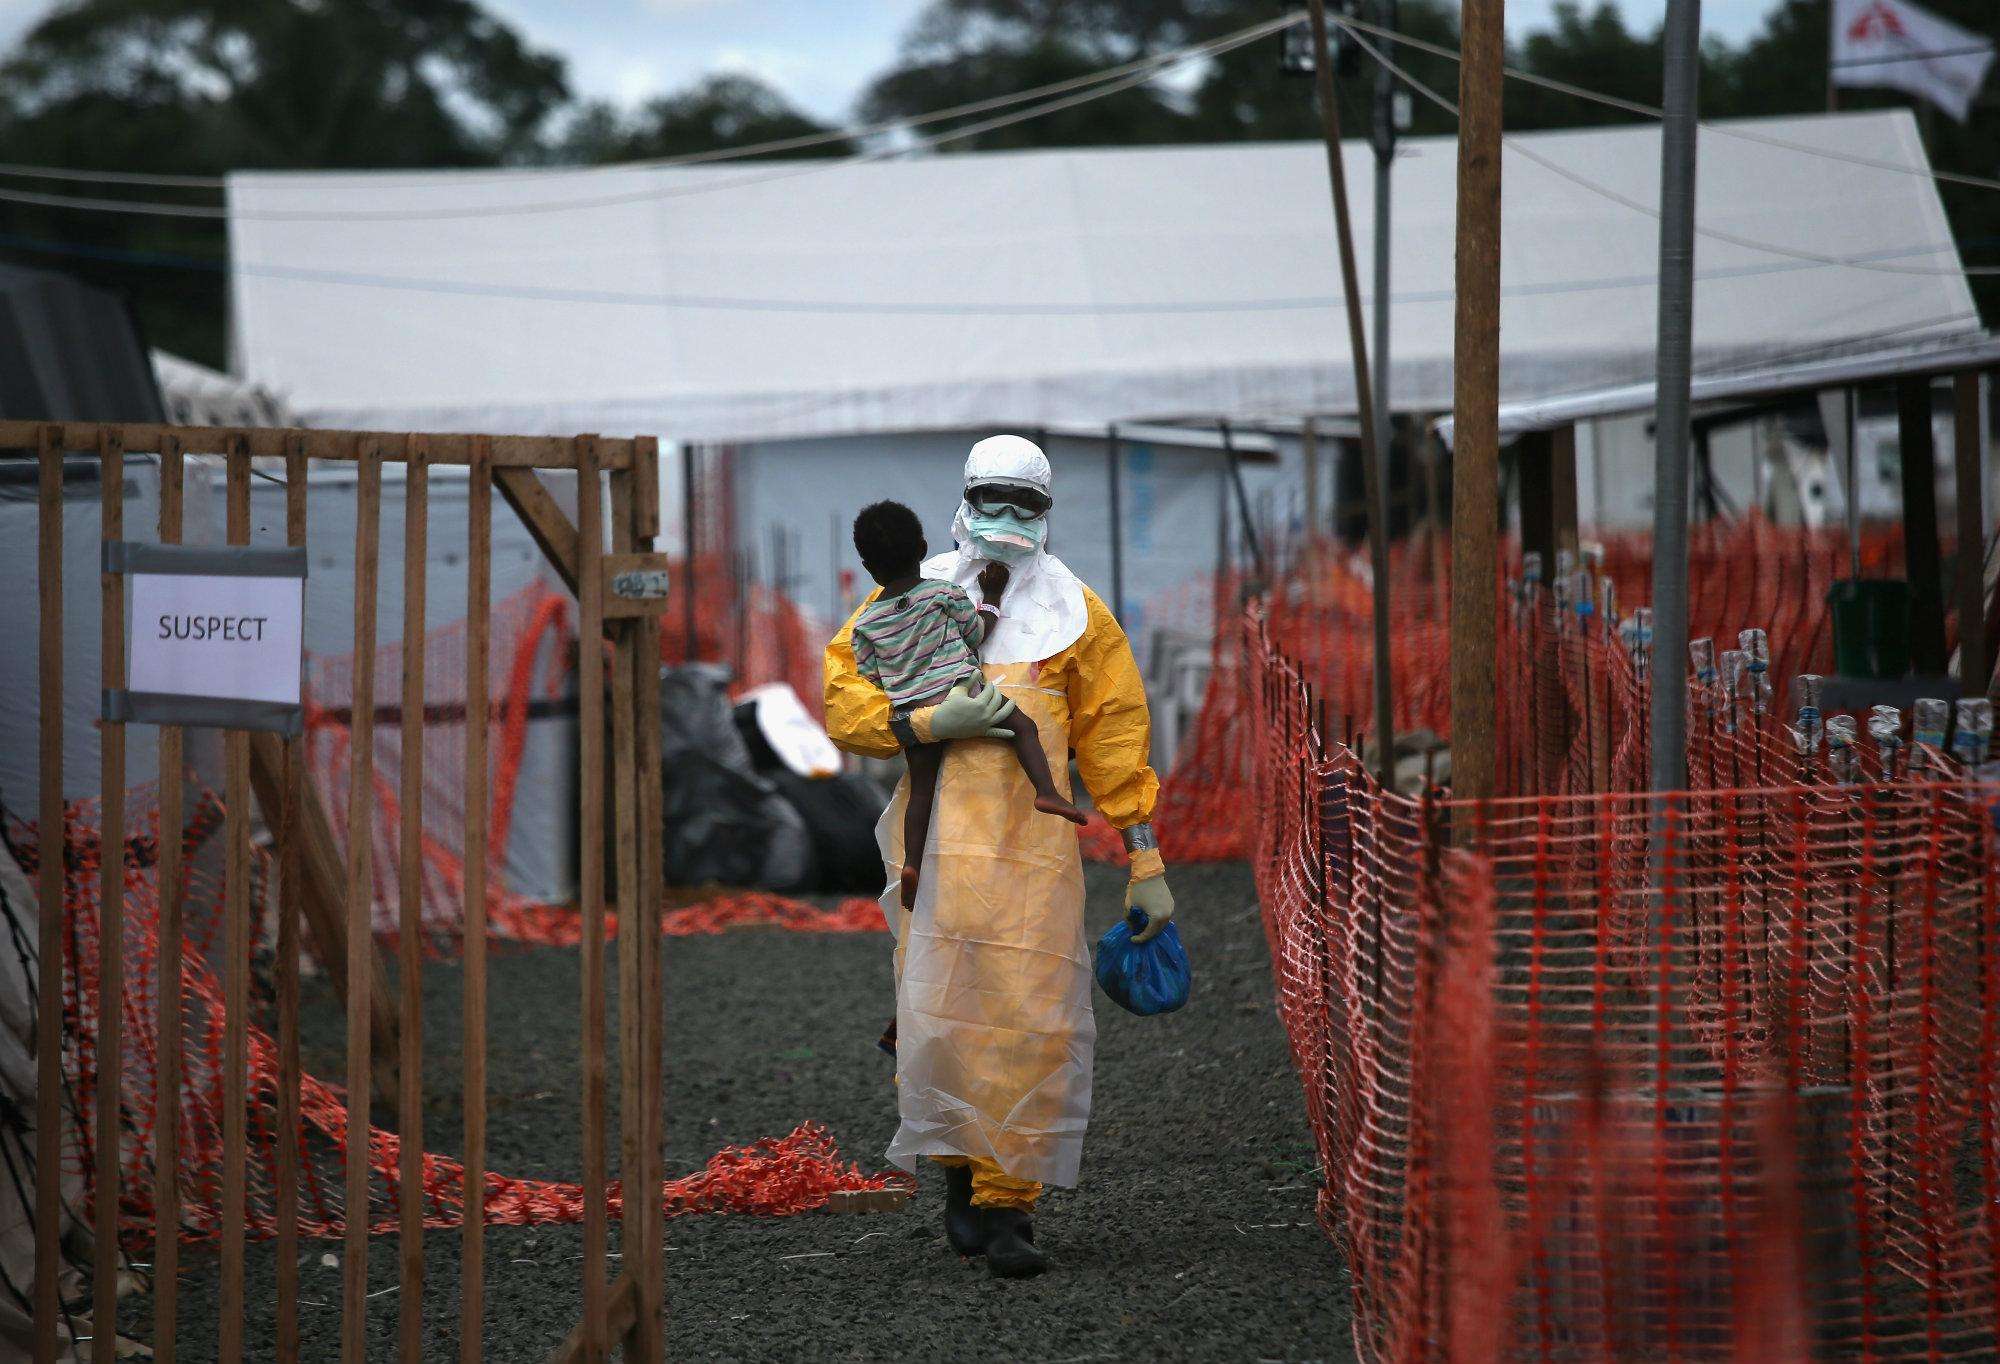 An MSF health worker carries a child suspected of having Ebola.